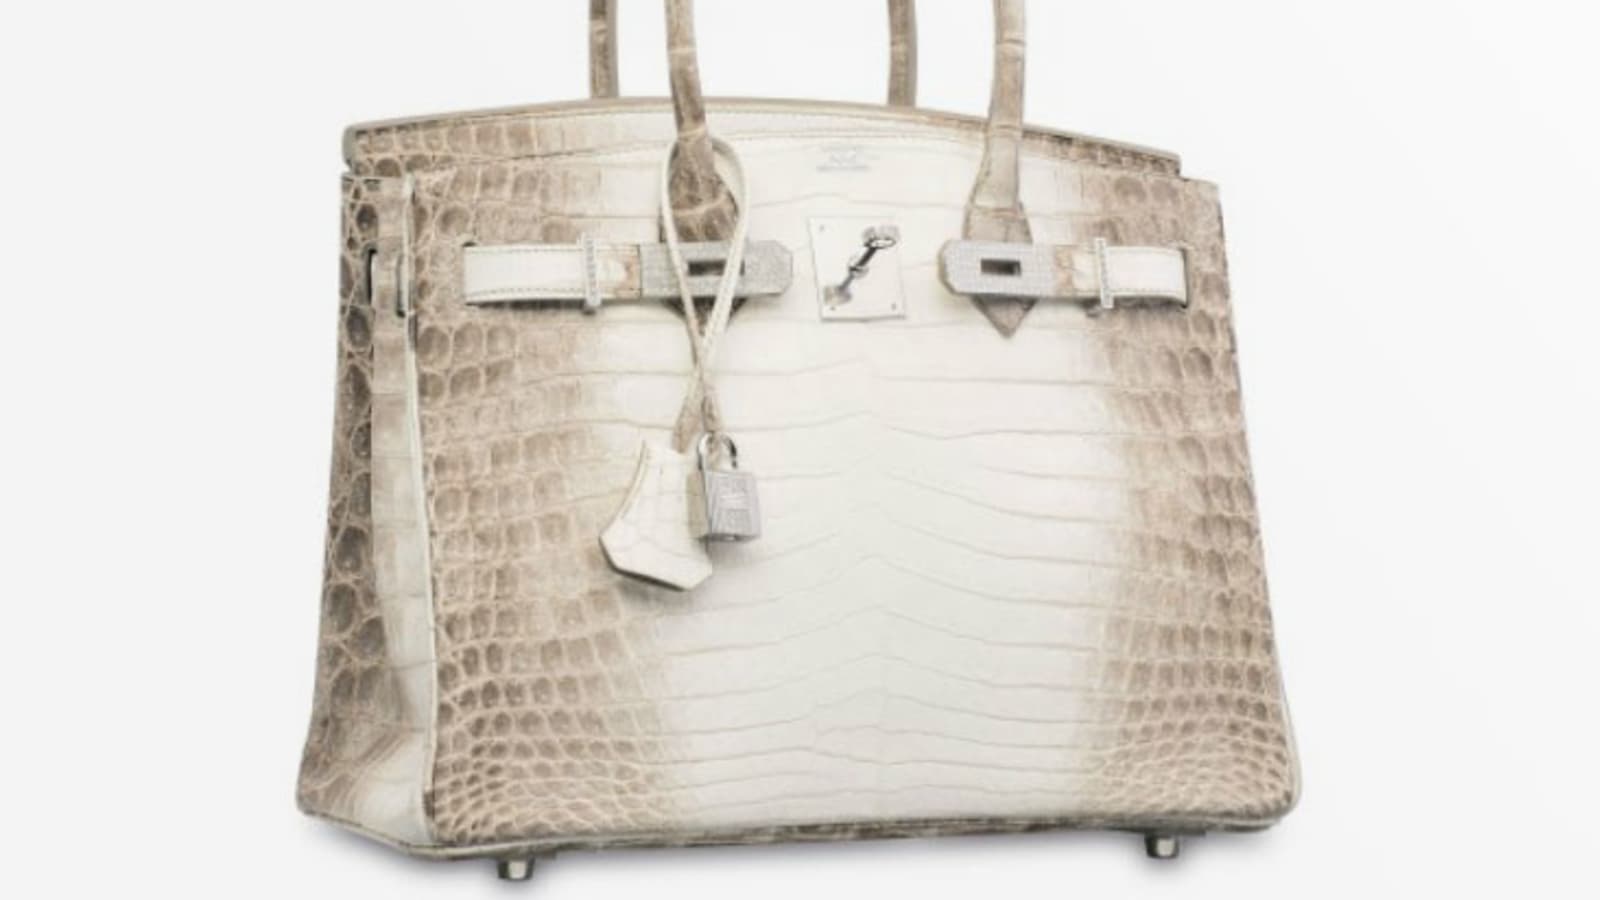 Christie's Just Sold the Most Expensive Handbag Ever—a $300,000 Birkin